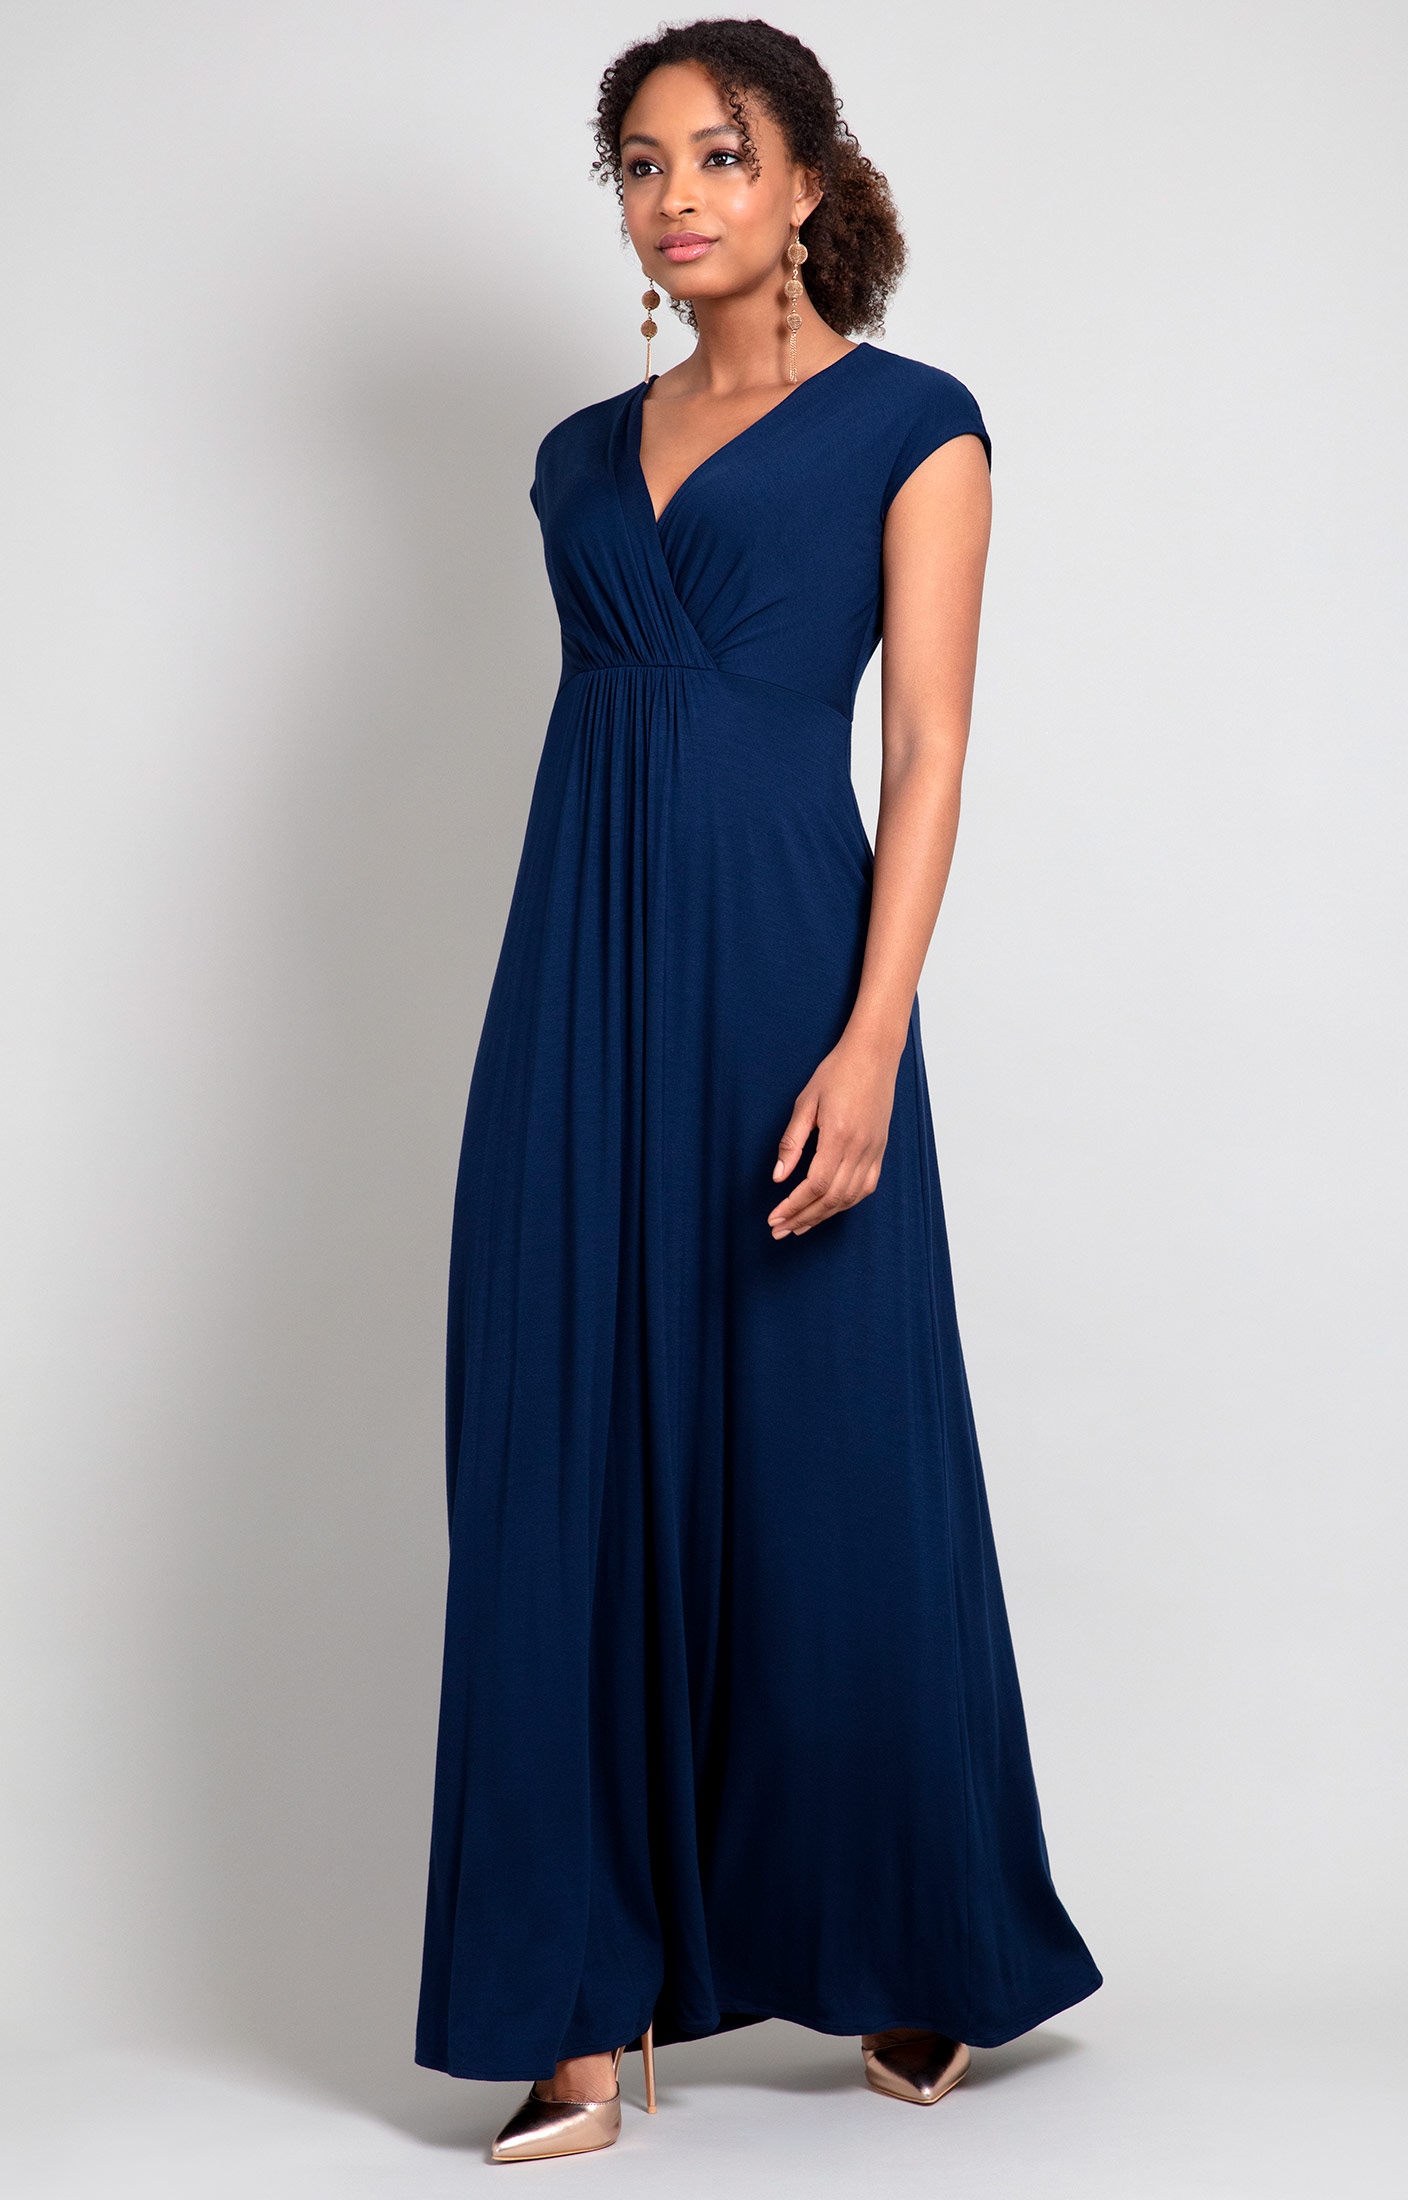 Formal Dresses, Evening Gowns & More | BeverleyOlivacce.Com – Beverley  Olivacce